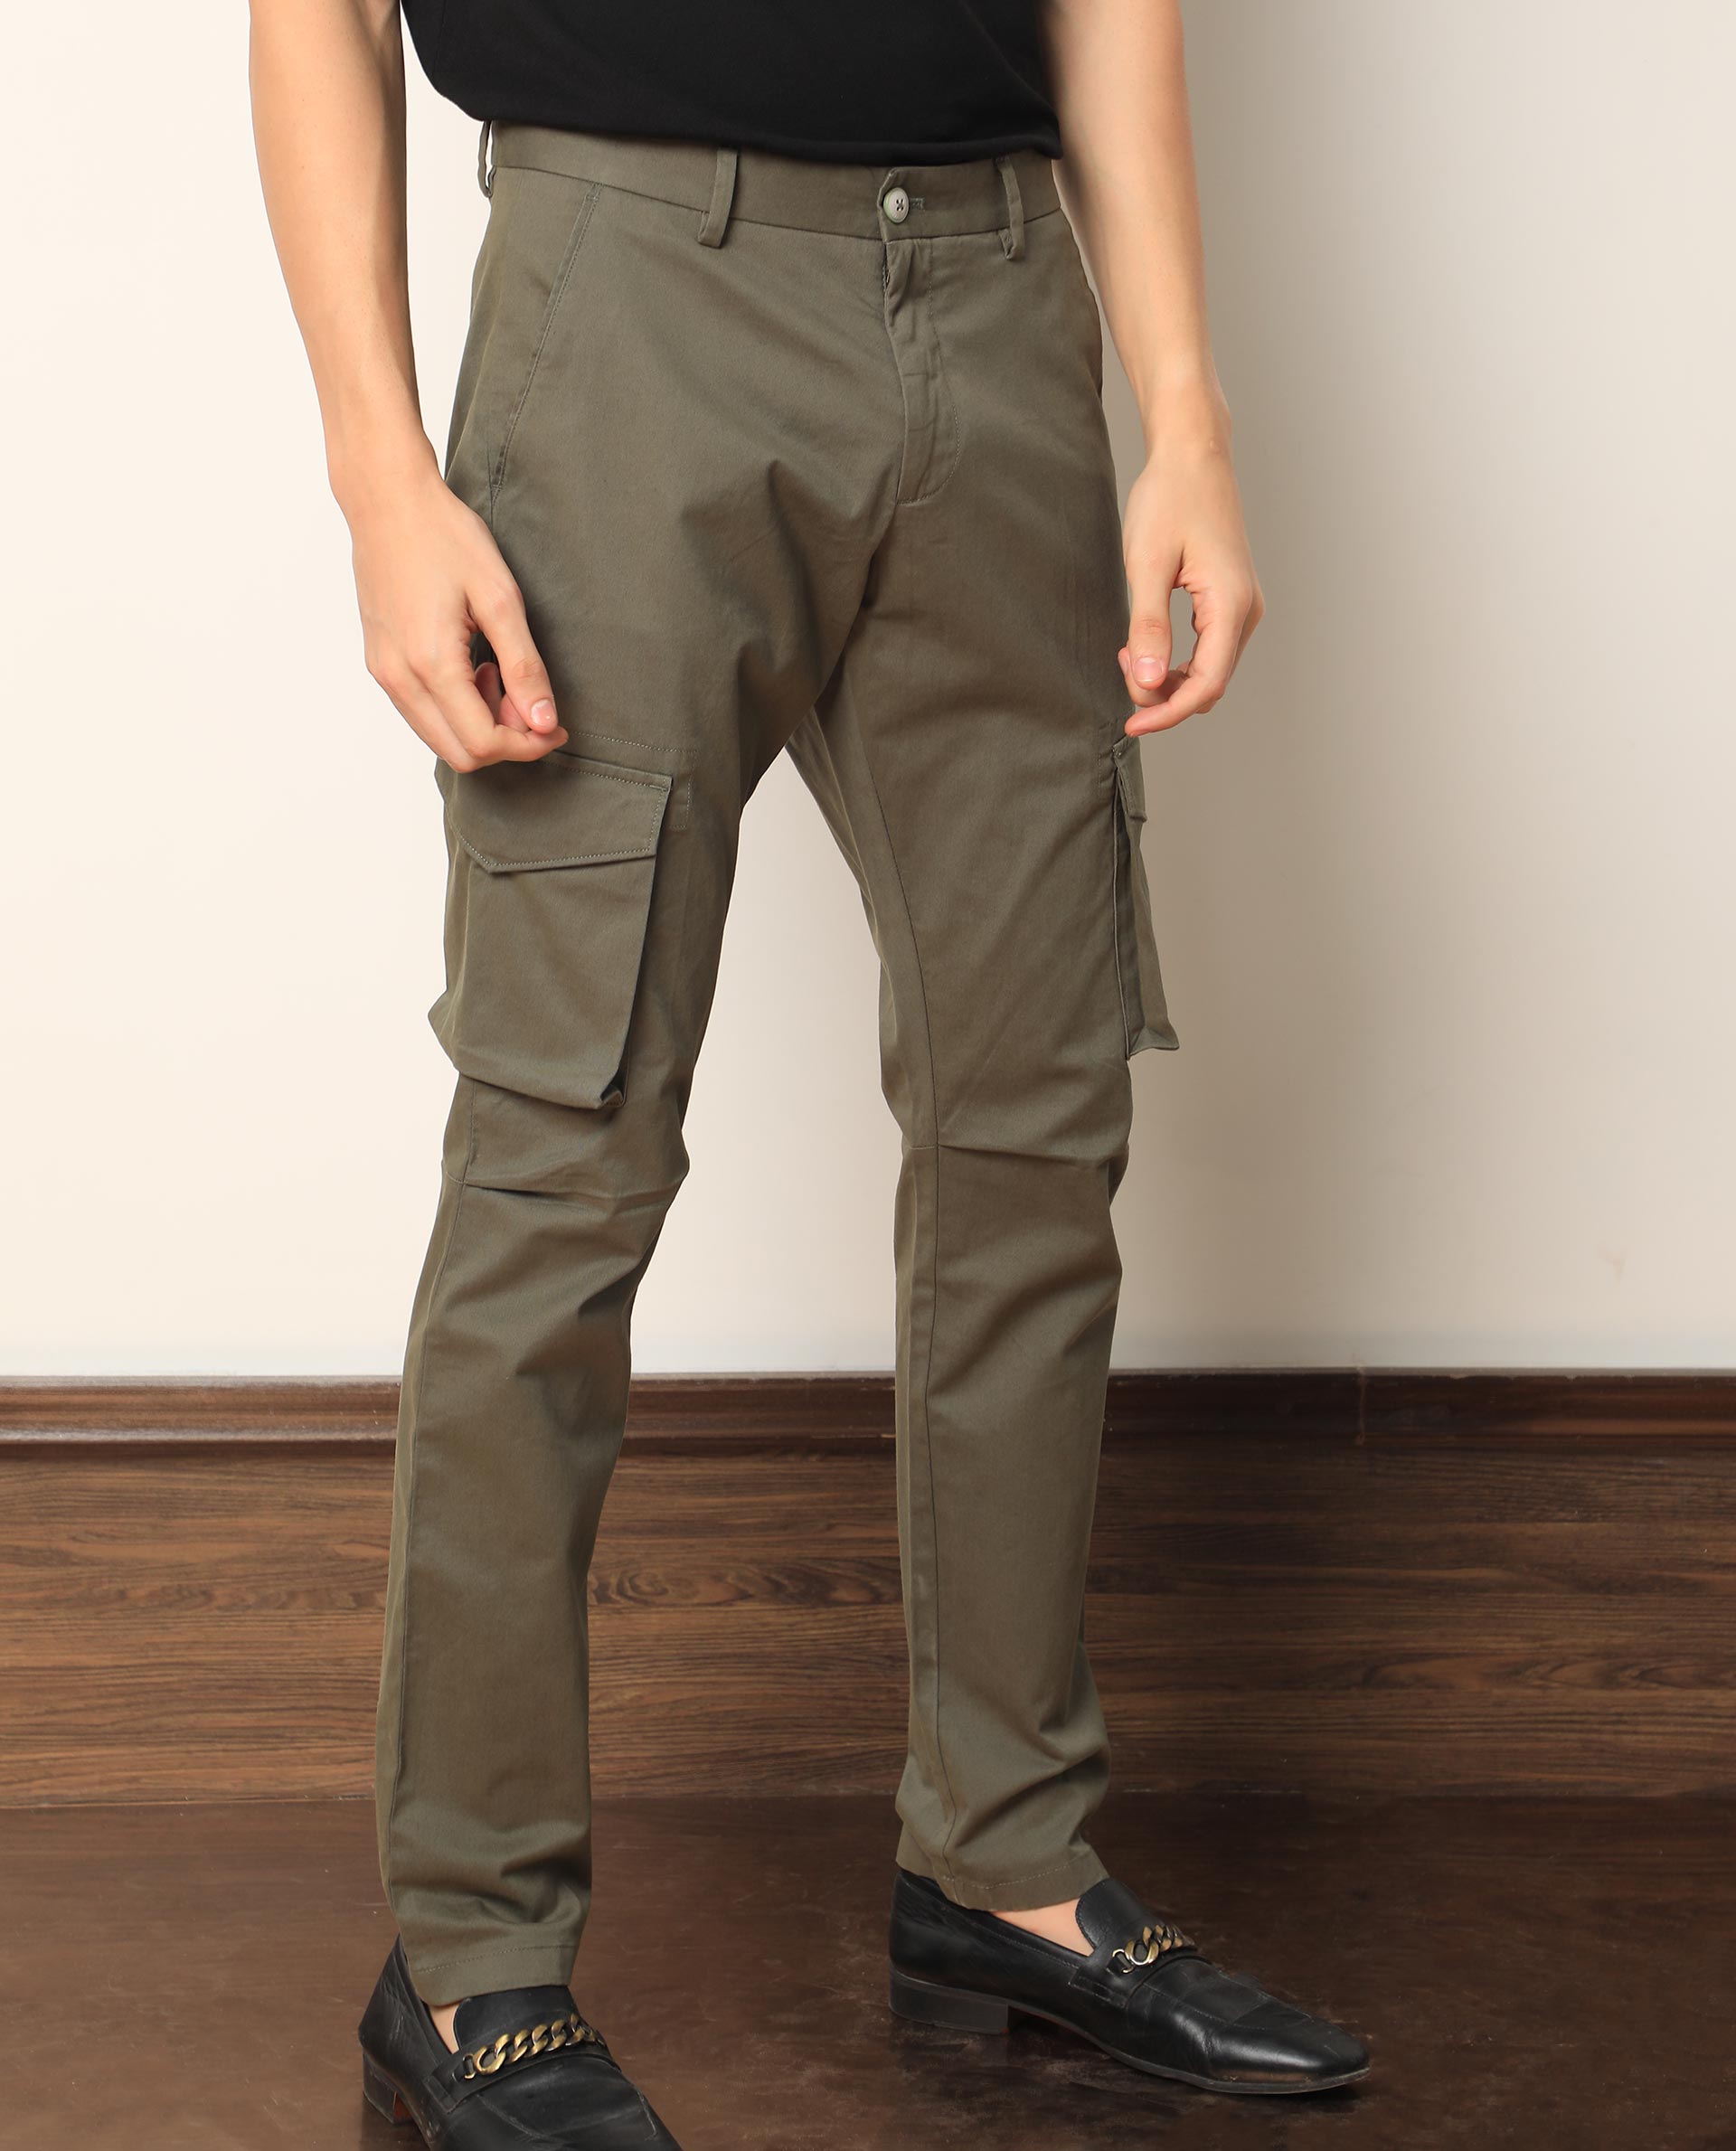 WENKOMG1 Cargo Pants for Men,Solid Slim Fit Casual India | Ubuy